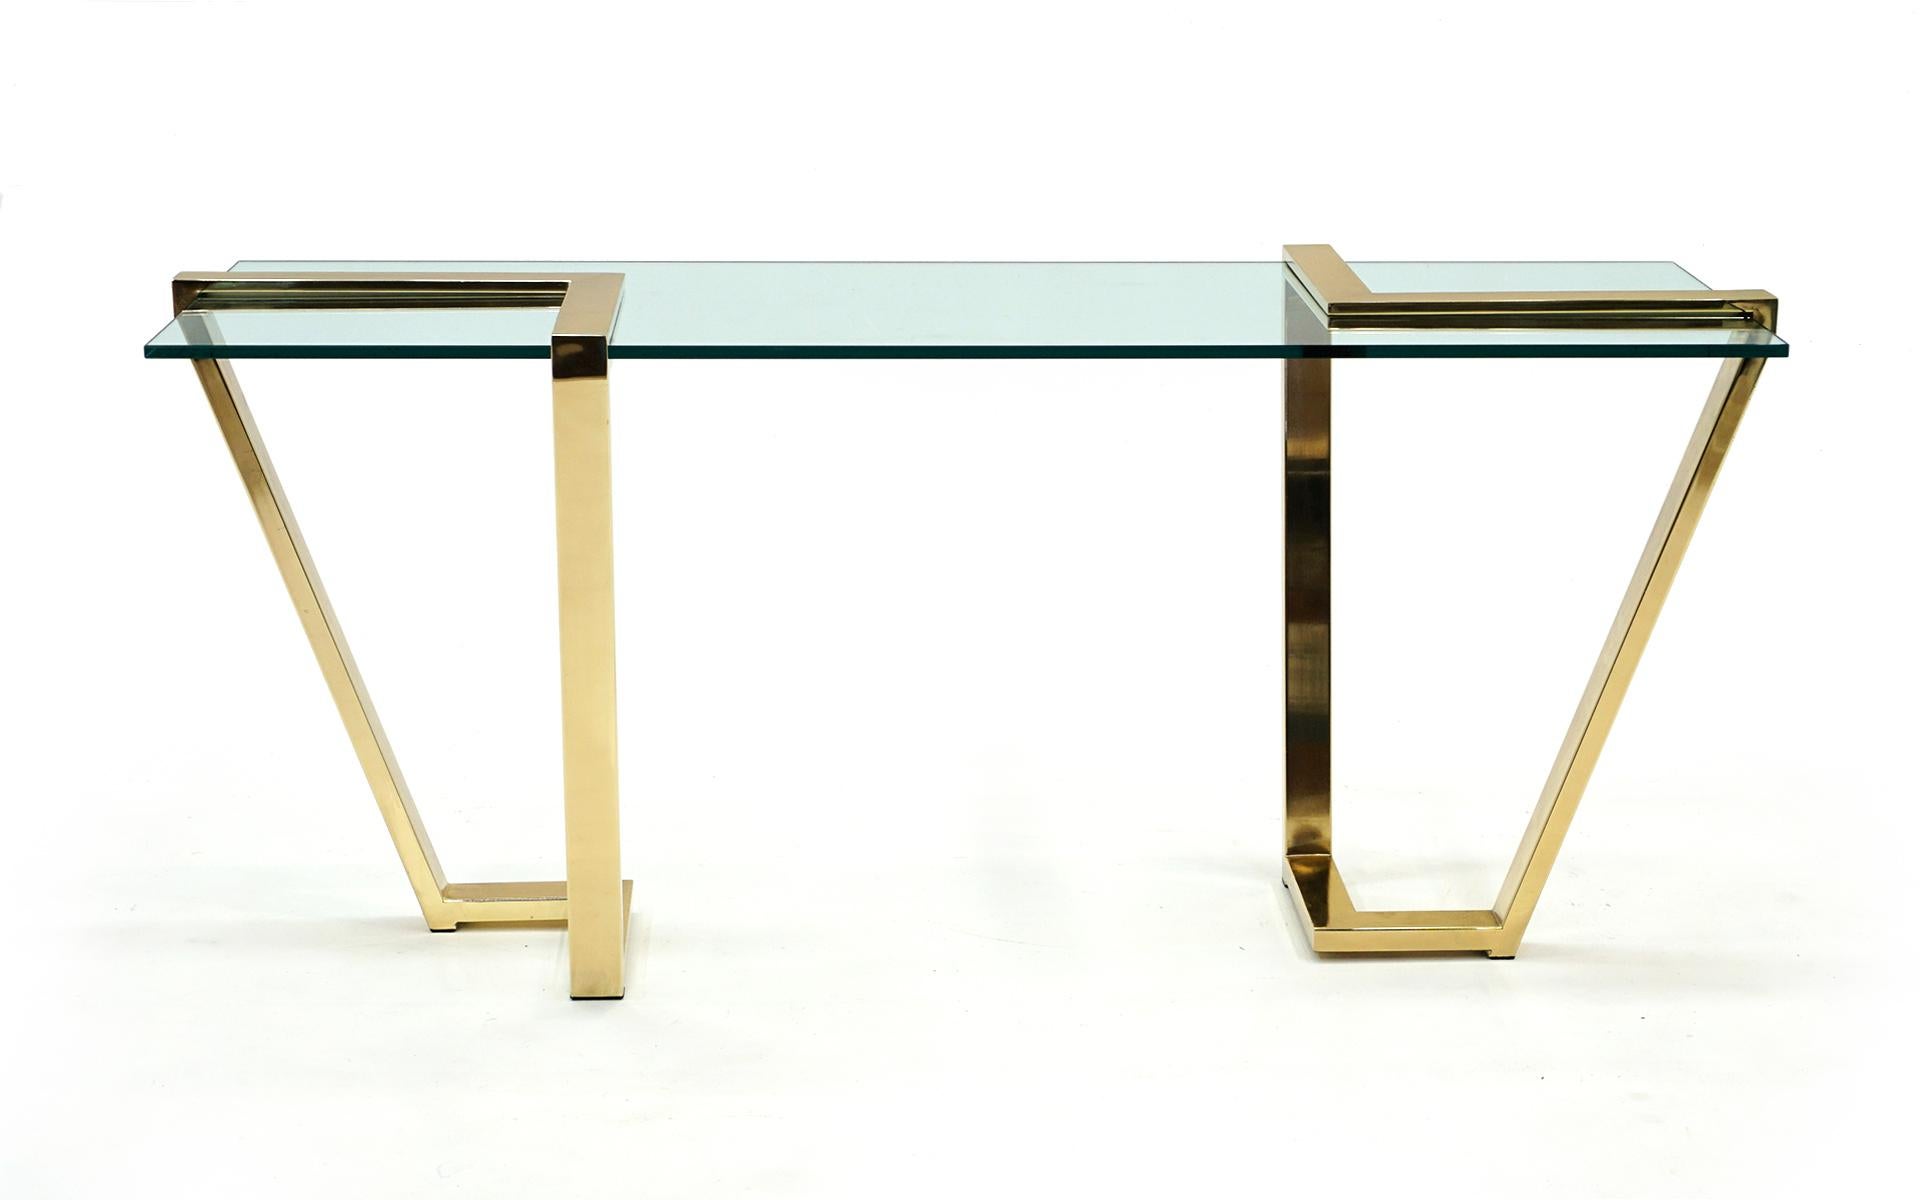 Console / Sofa / Hall Table in brass and glass by Design Institute of America (DIA), 1970s. Striking design in which the original glass inserts into the brass frames with a screw on each that goes through the glass so it is secure in the frames. The